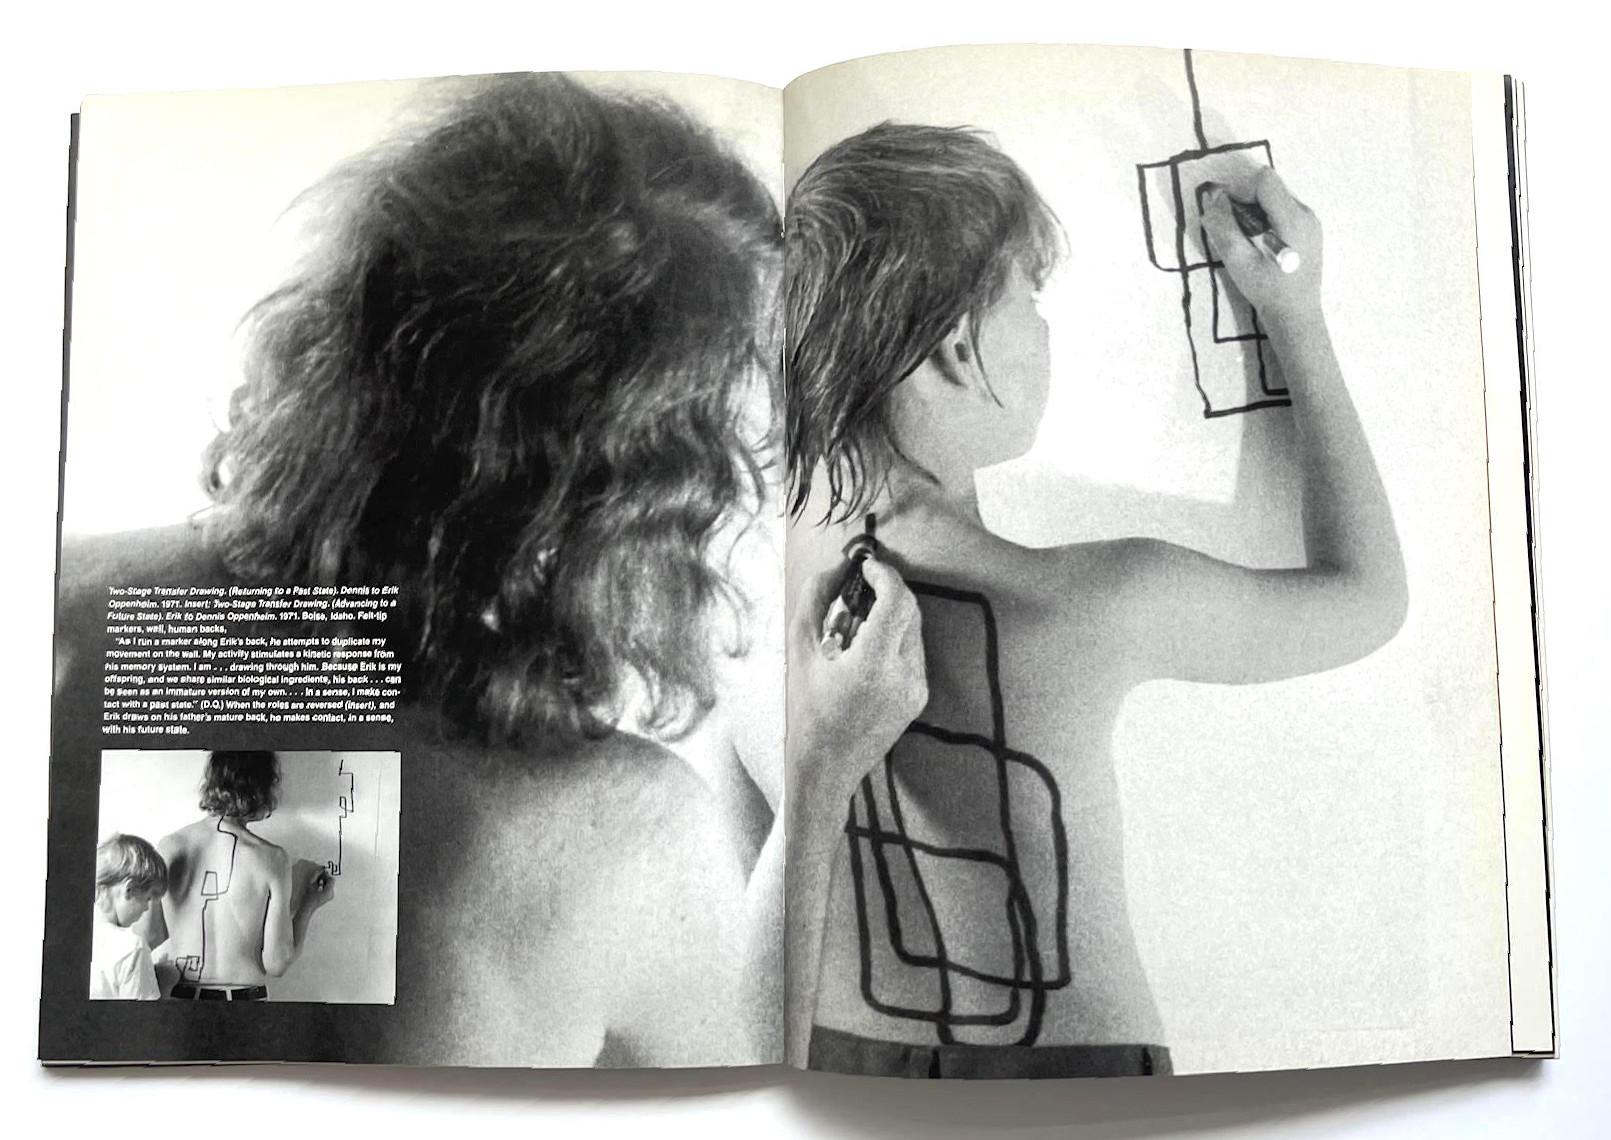 Dennis Oppenheim
Dennis Oppenheim: Selected Works 1967-90 : And the Mind Grew Fingers (with handwritten signed letter laid in separately), 1992
Softback book with separate hand signed letter laid in
It contains a separate hand signed letter laid in